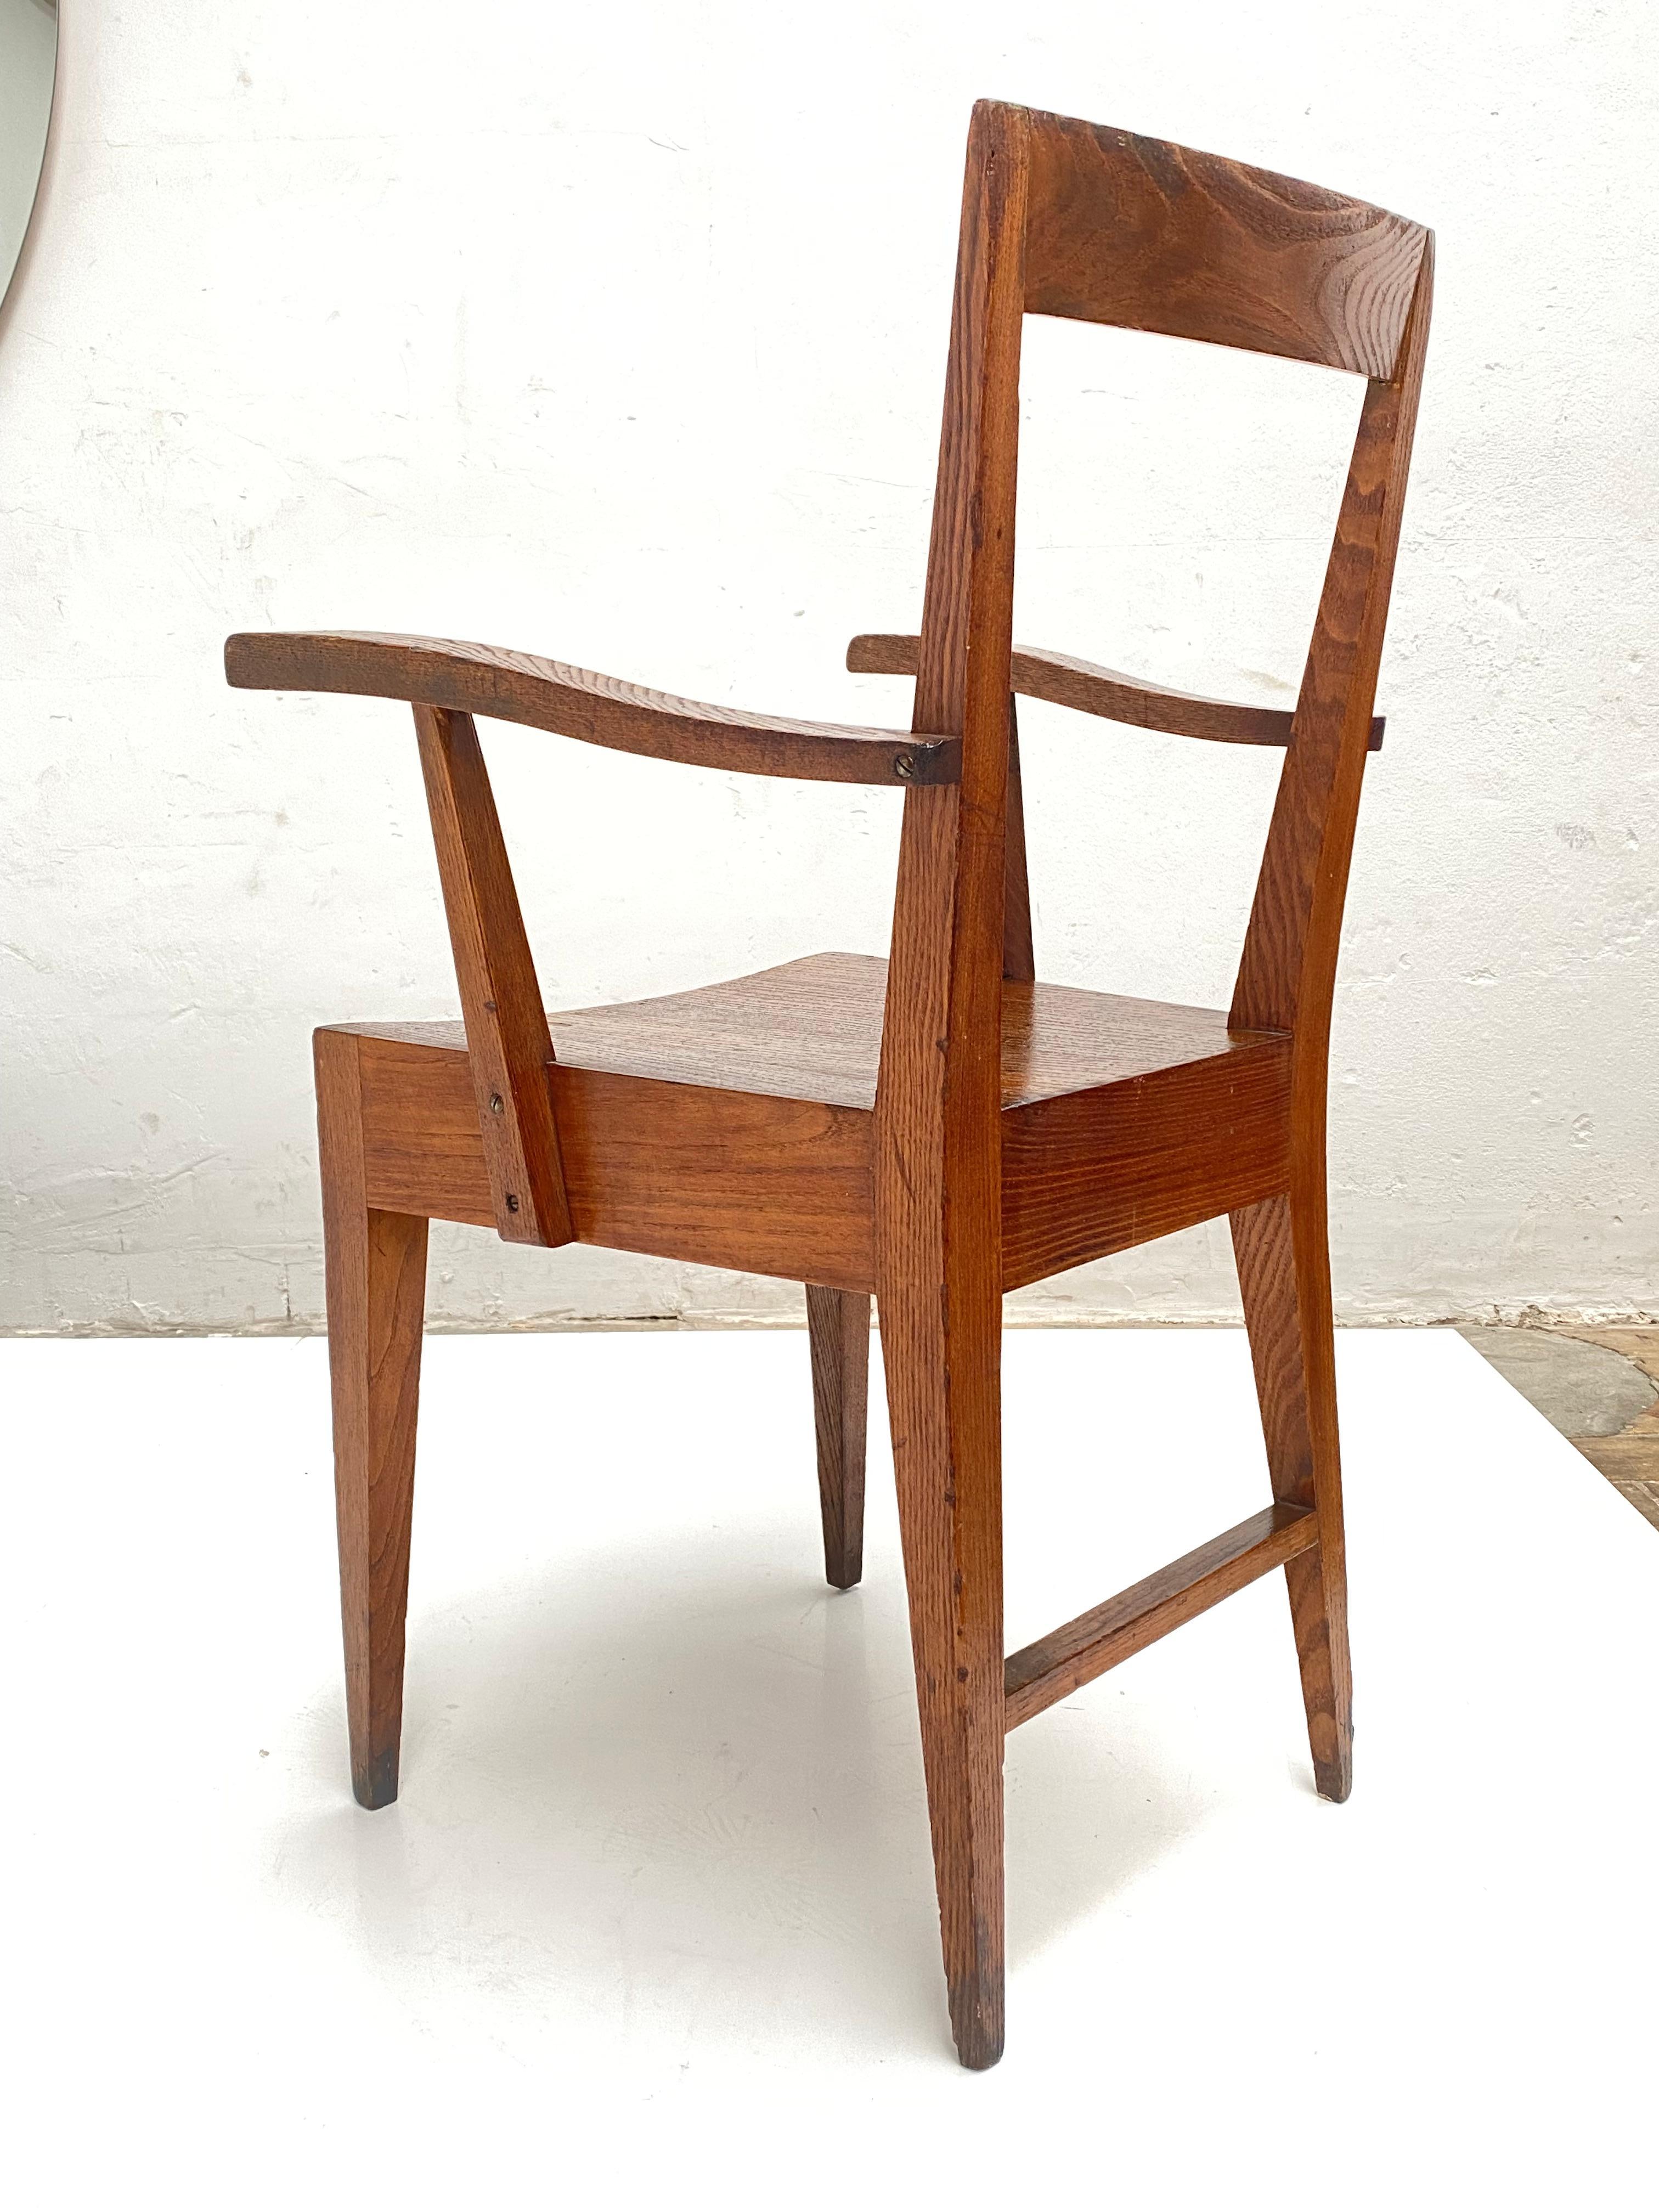 Stained Rare Walnut Archair from University of Padova Attributed to Gio Ponti Ca 1935-7 For Sale